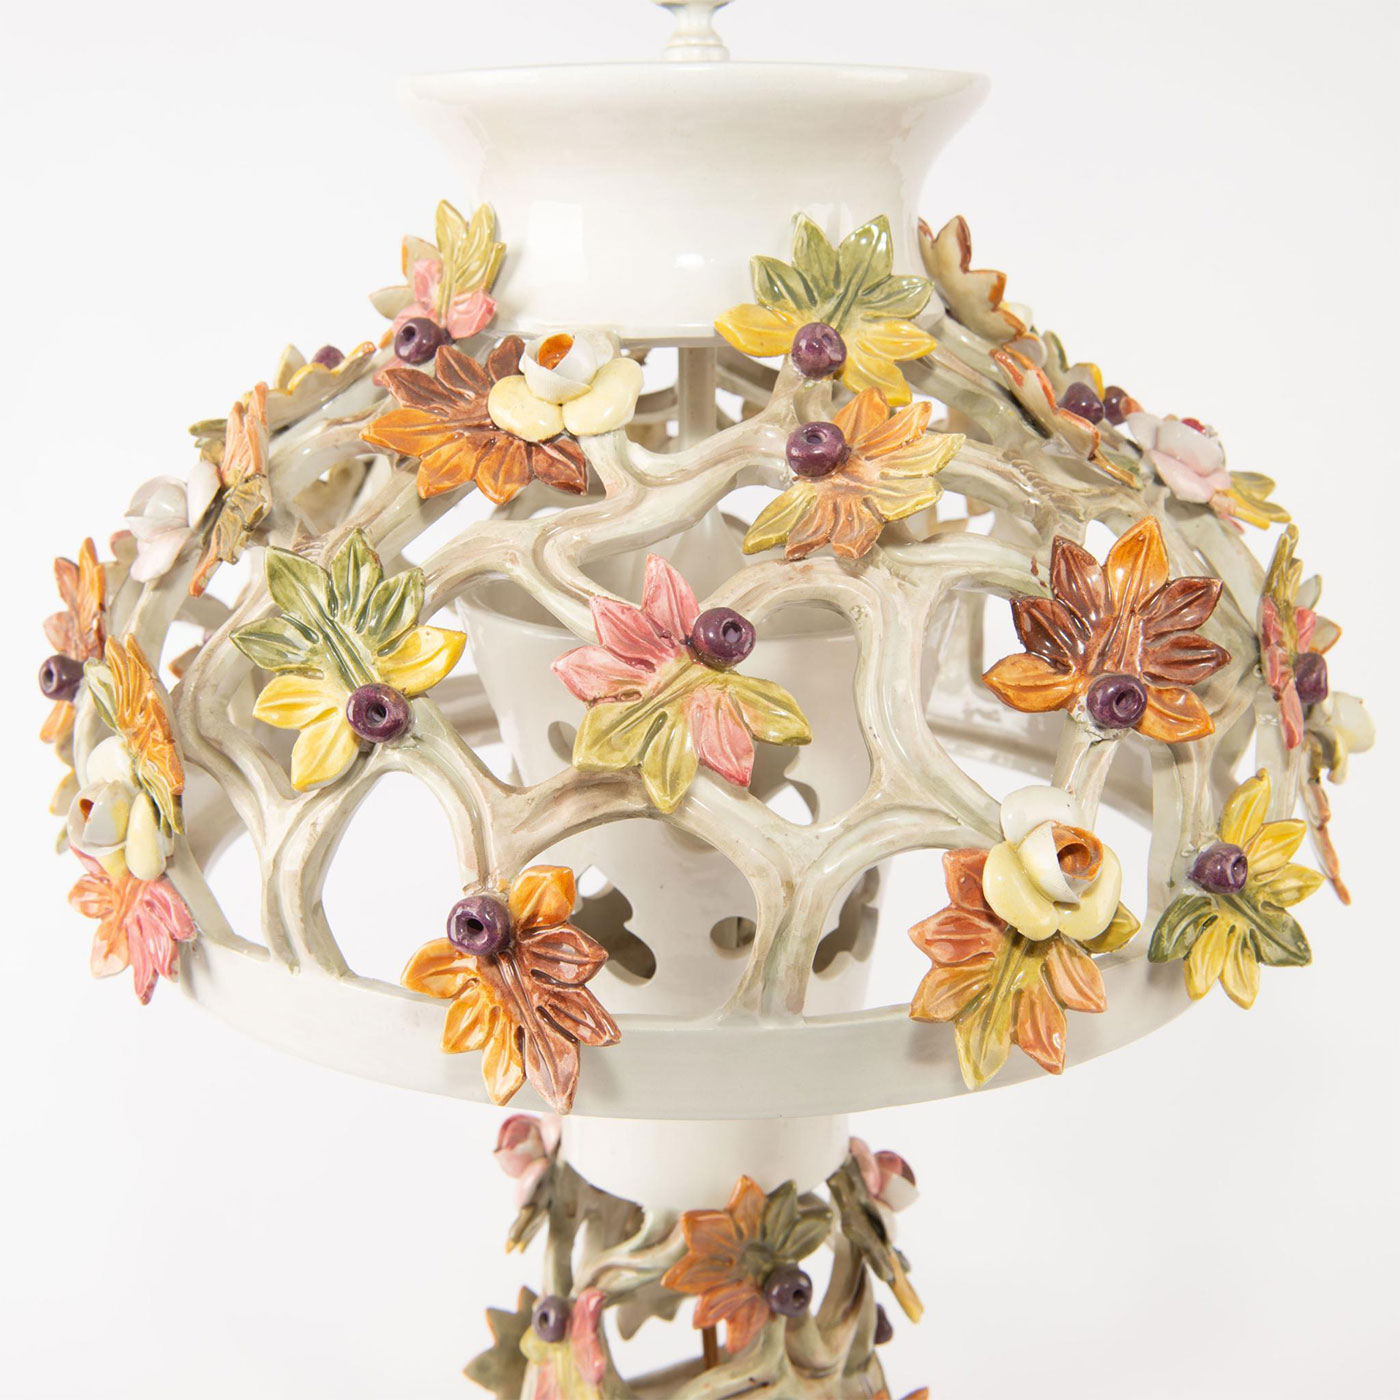 VICTORIAN MAJOLICA INSPIRED CERAMIC FLORAL TABLE LAMP - Image 2 of 7